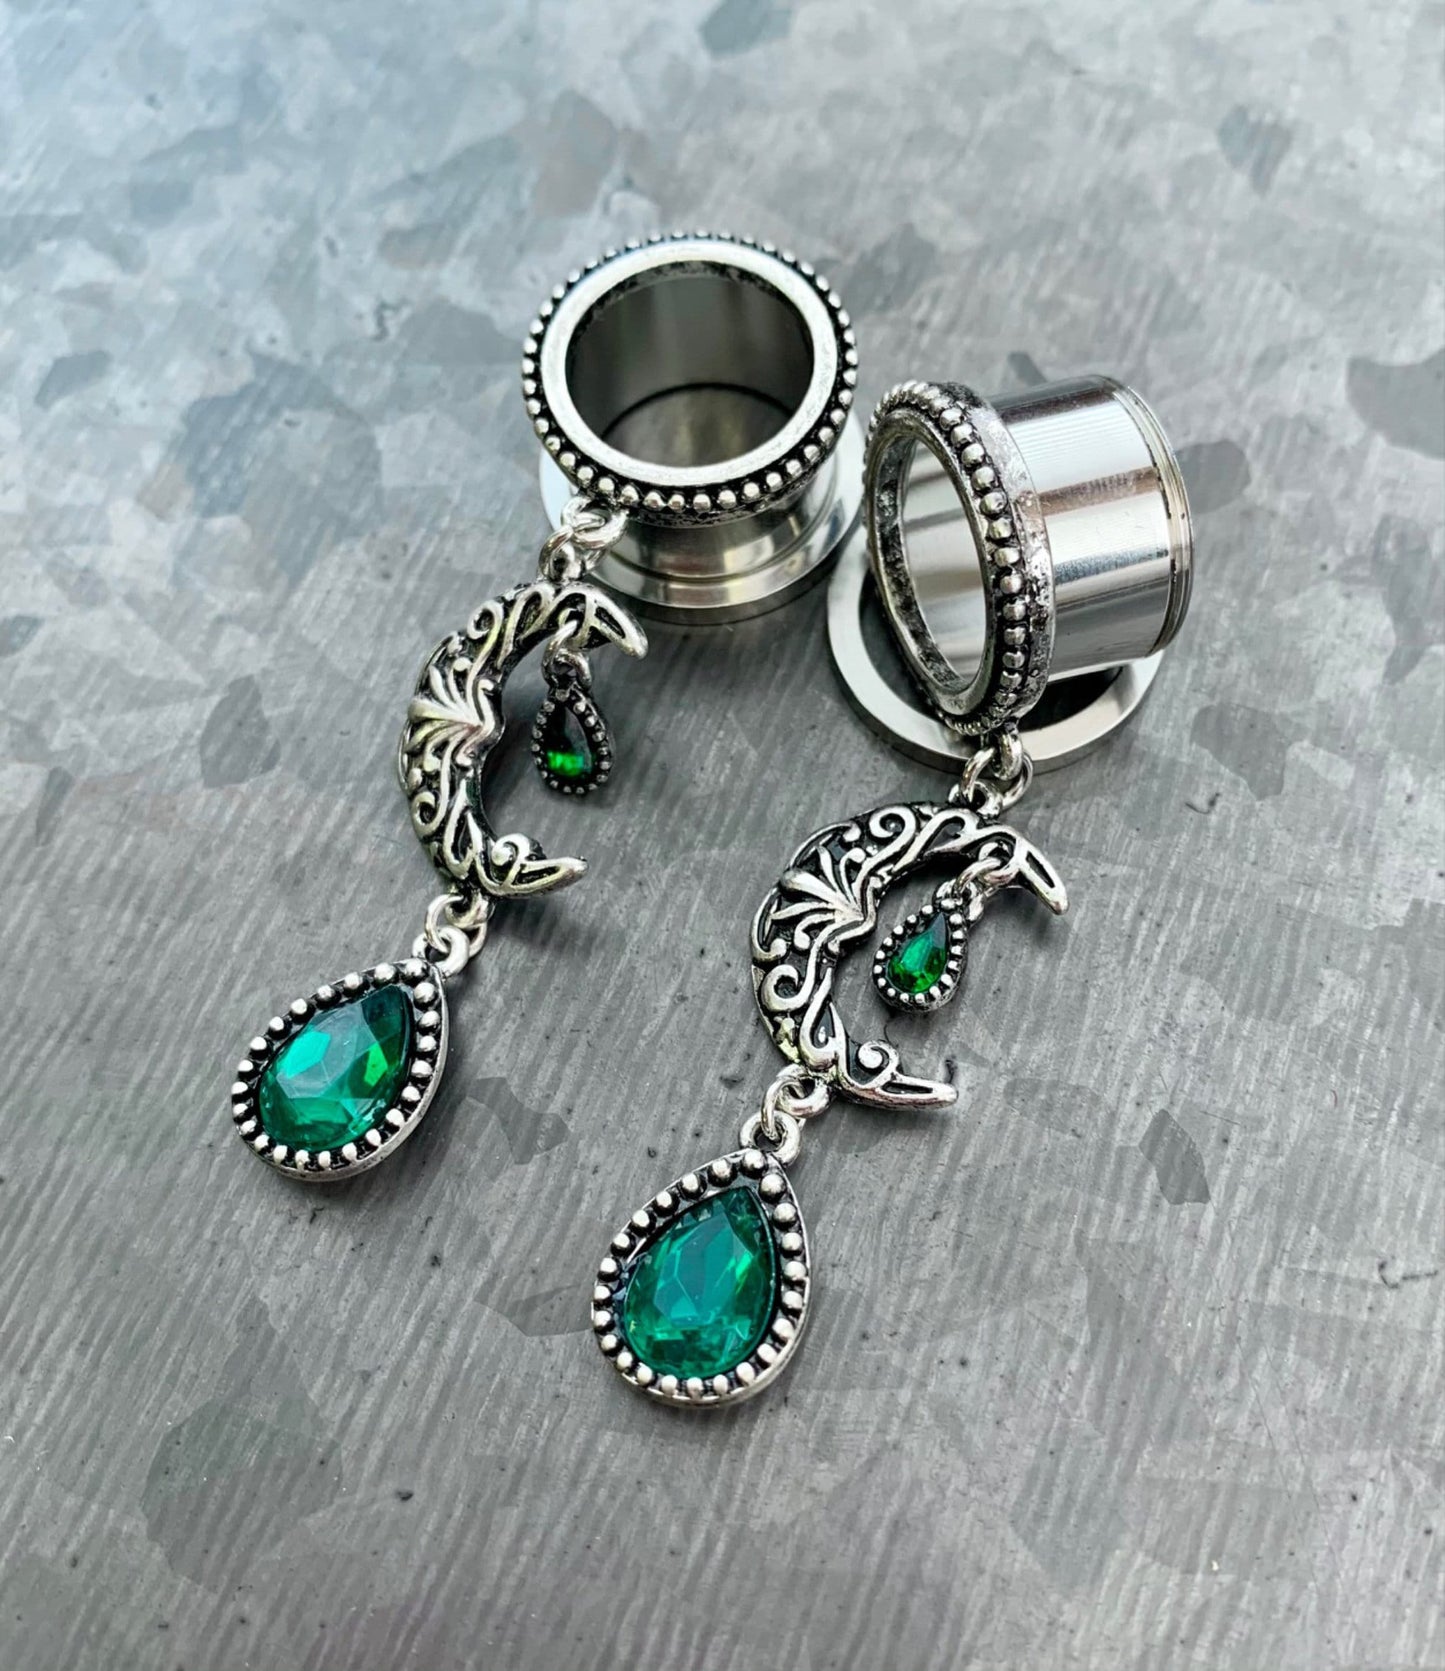 PAIR of Unique Emerald Green Stone Moon Dangle Screw Fit Tunnels/Plugs - Gauges 2g (6mm) thru 5/8" (16mm) available!